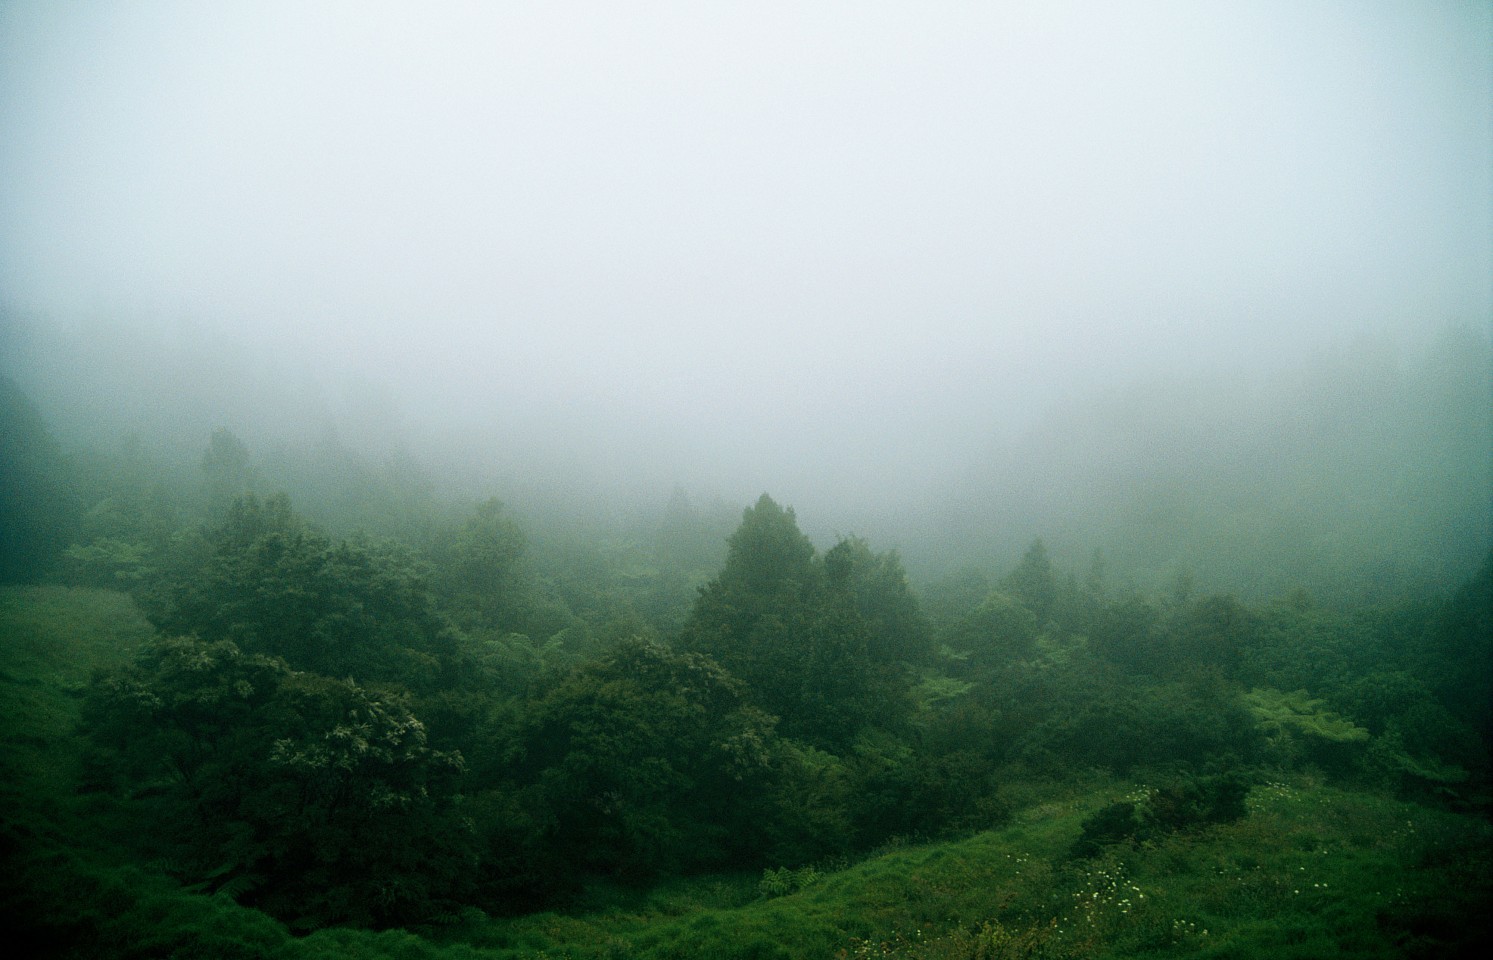 Jason Frank Rothenberg
Misty, Edition of 8, 2014
JFR021
archival pigment print, 36 x 56 inches, 41 x 61 inches framed